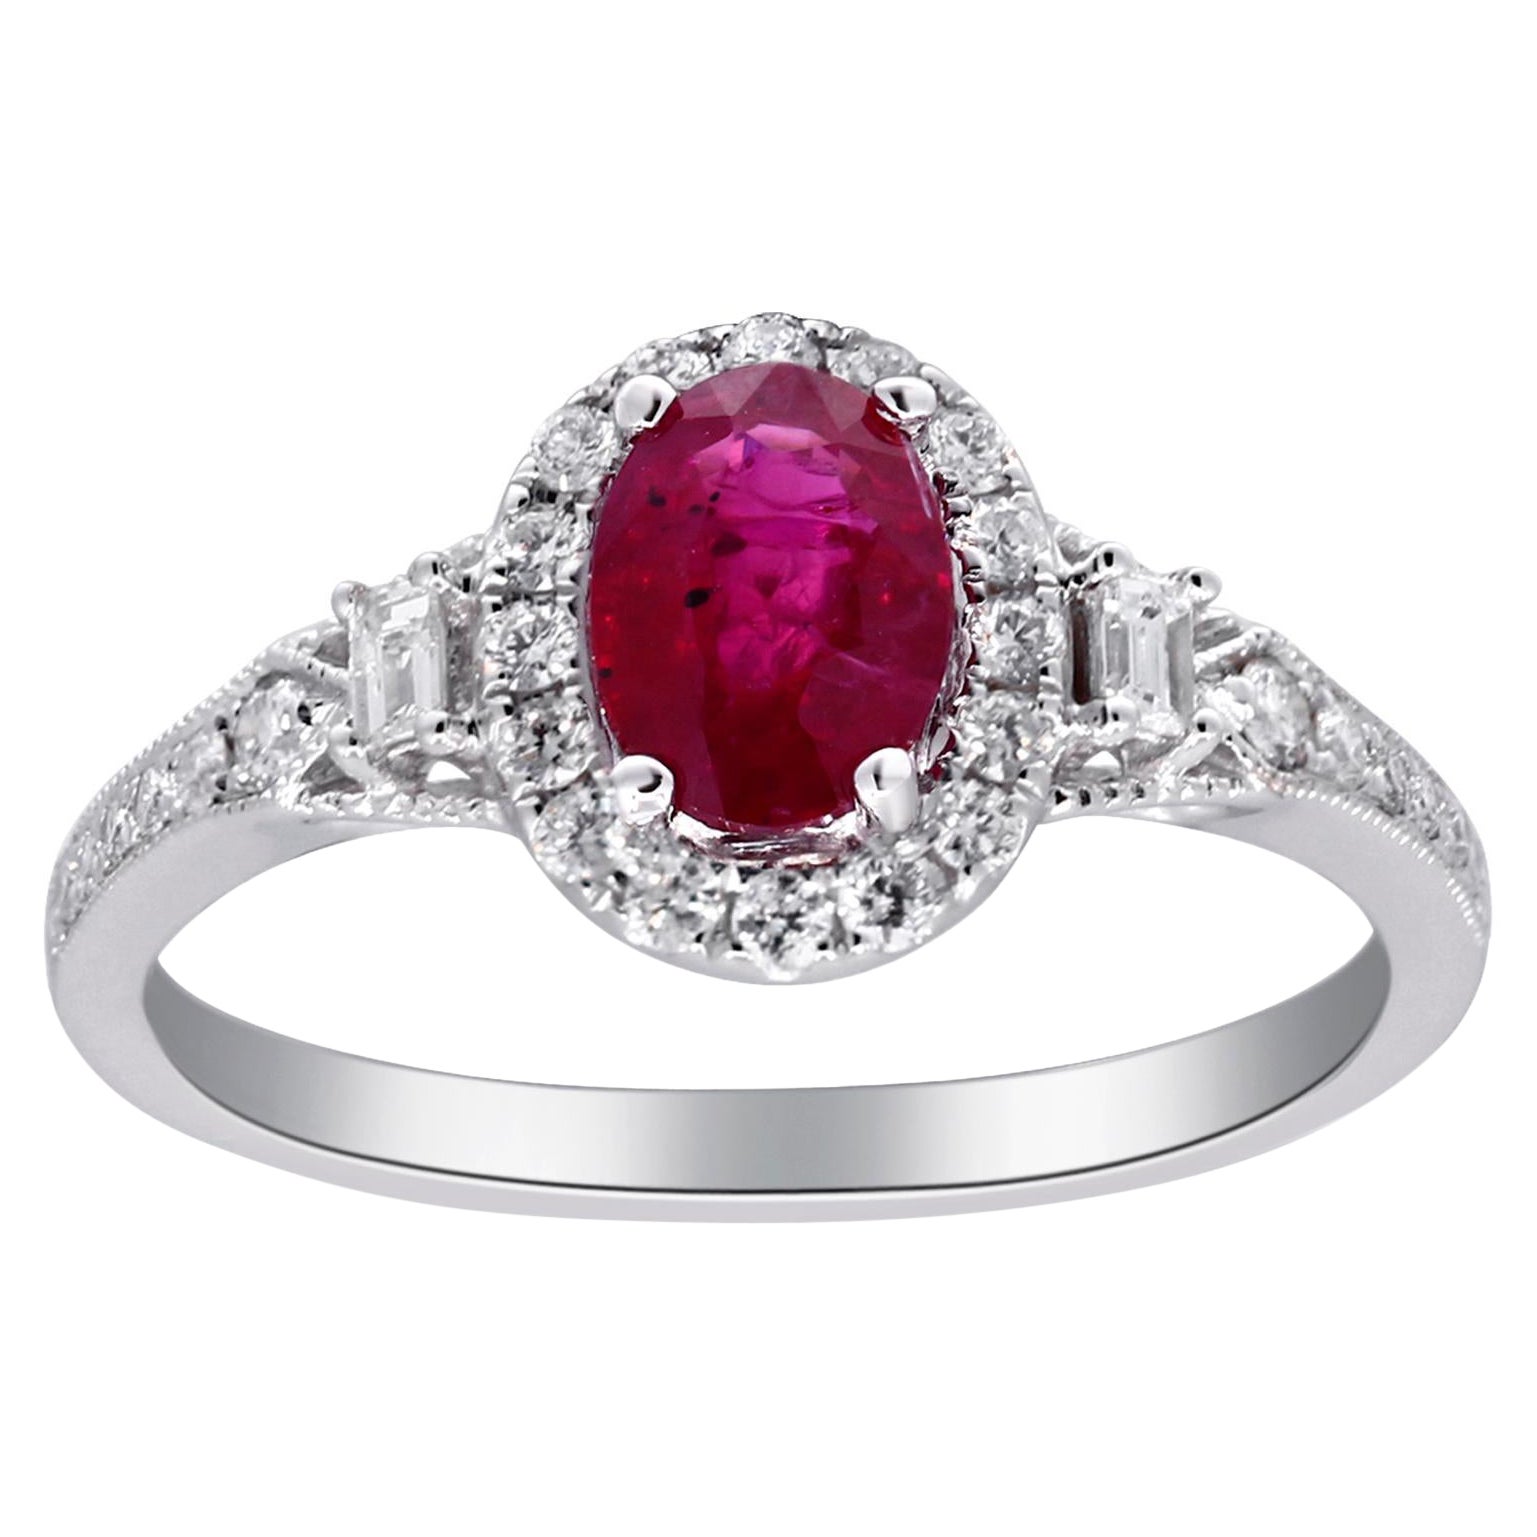 0.98 Carat Oval-Cut Ruby with Diamond Accents 14K White Gold Ring